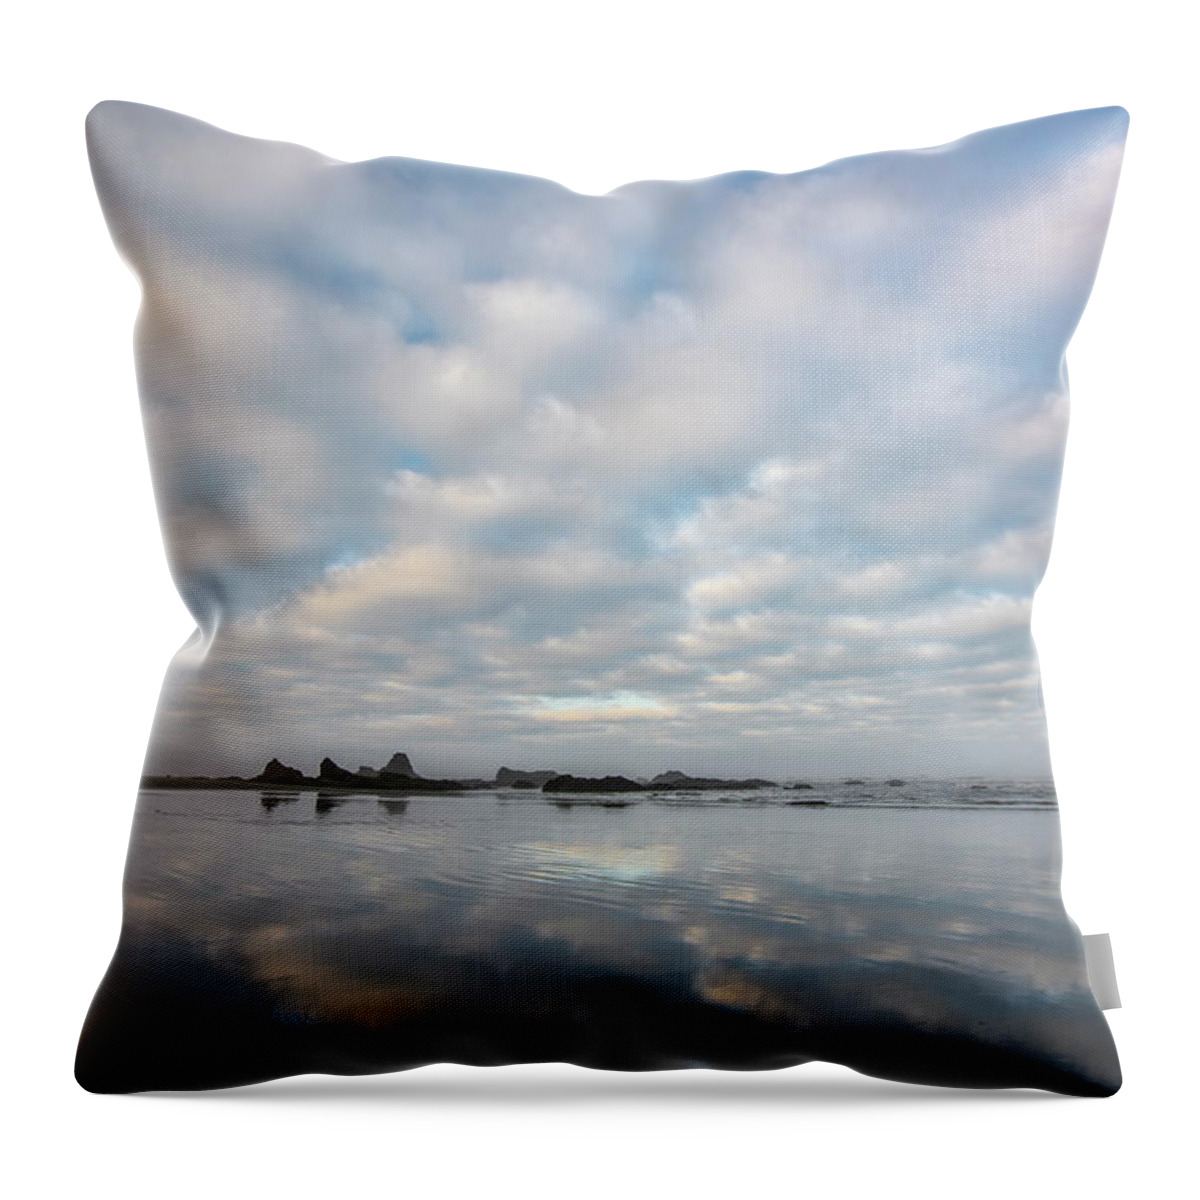 Art Throw Pillow featuring the photograph Simple Beach Scene by Jon Glaser